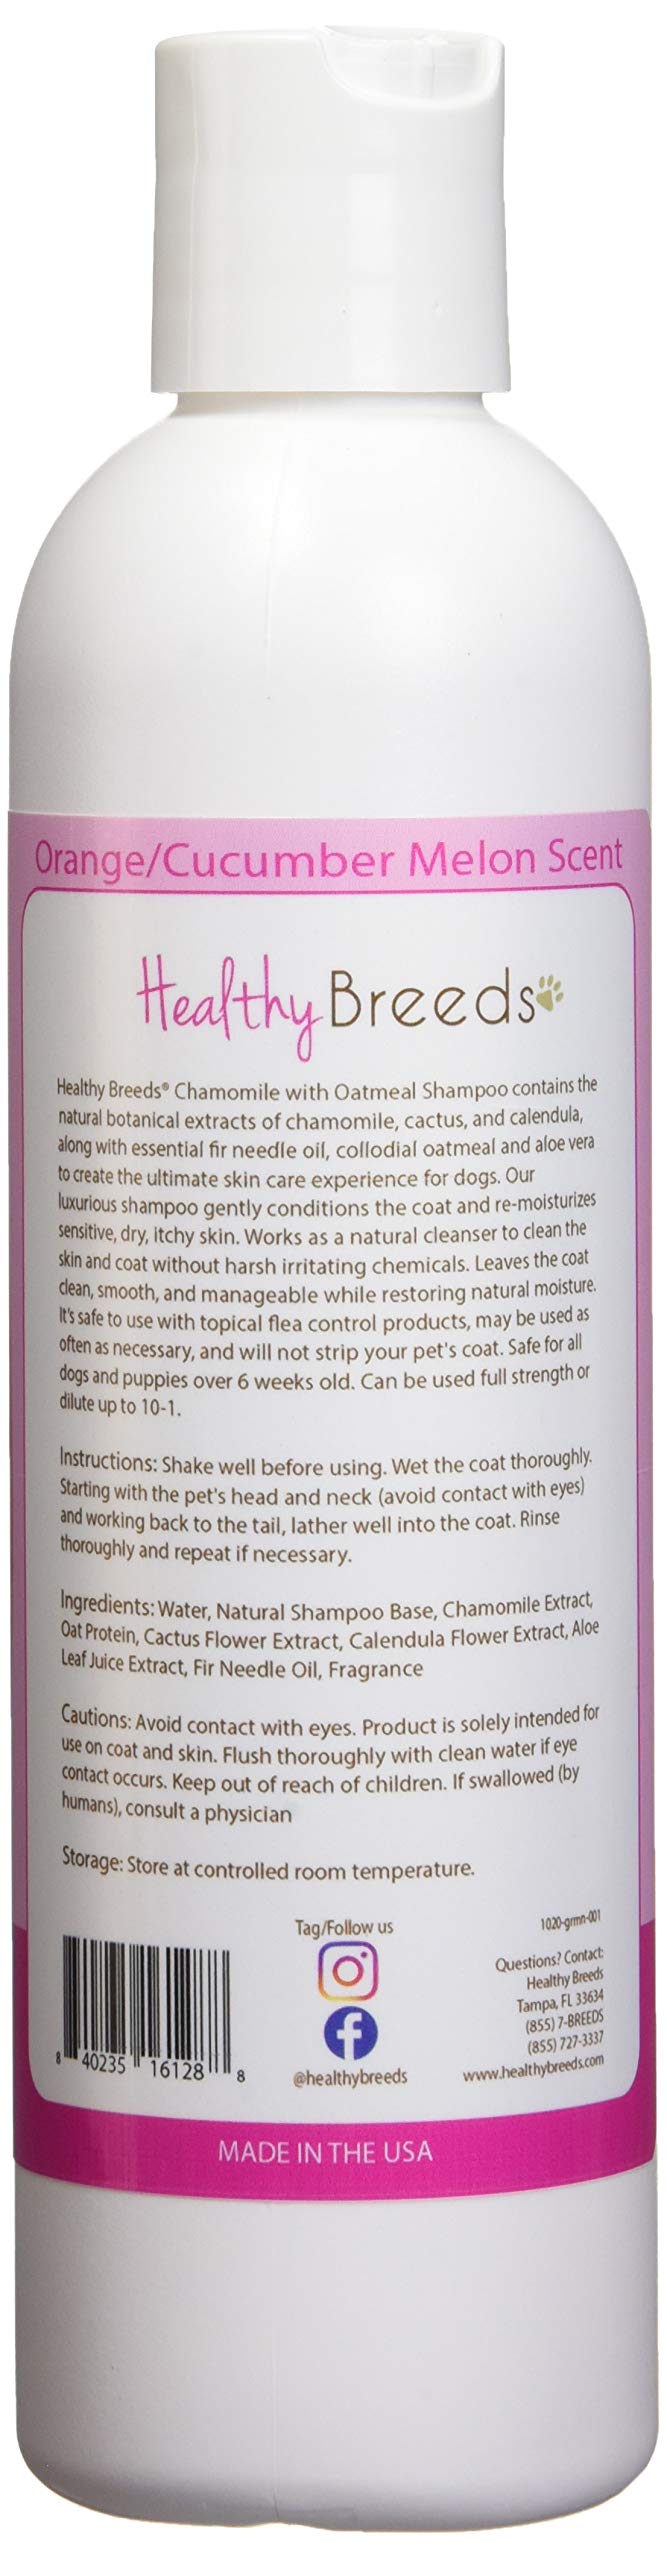 [Australia] - Healthy Breeds Chamomile Oatmeal & Aloe Soothing Shampoo & Conditioner - Over 200 Breeds - Safe with Flea & Tick Topicals - Orange & Cucumber Melon Scent - 8 oz German Shepherd, Brown 